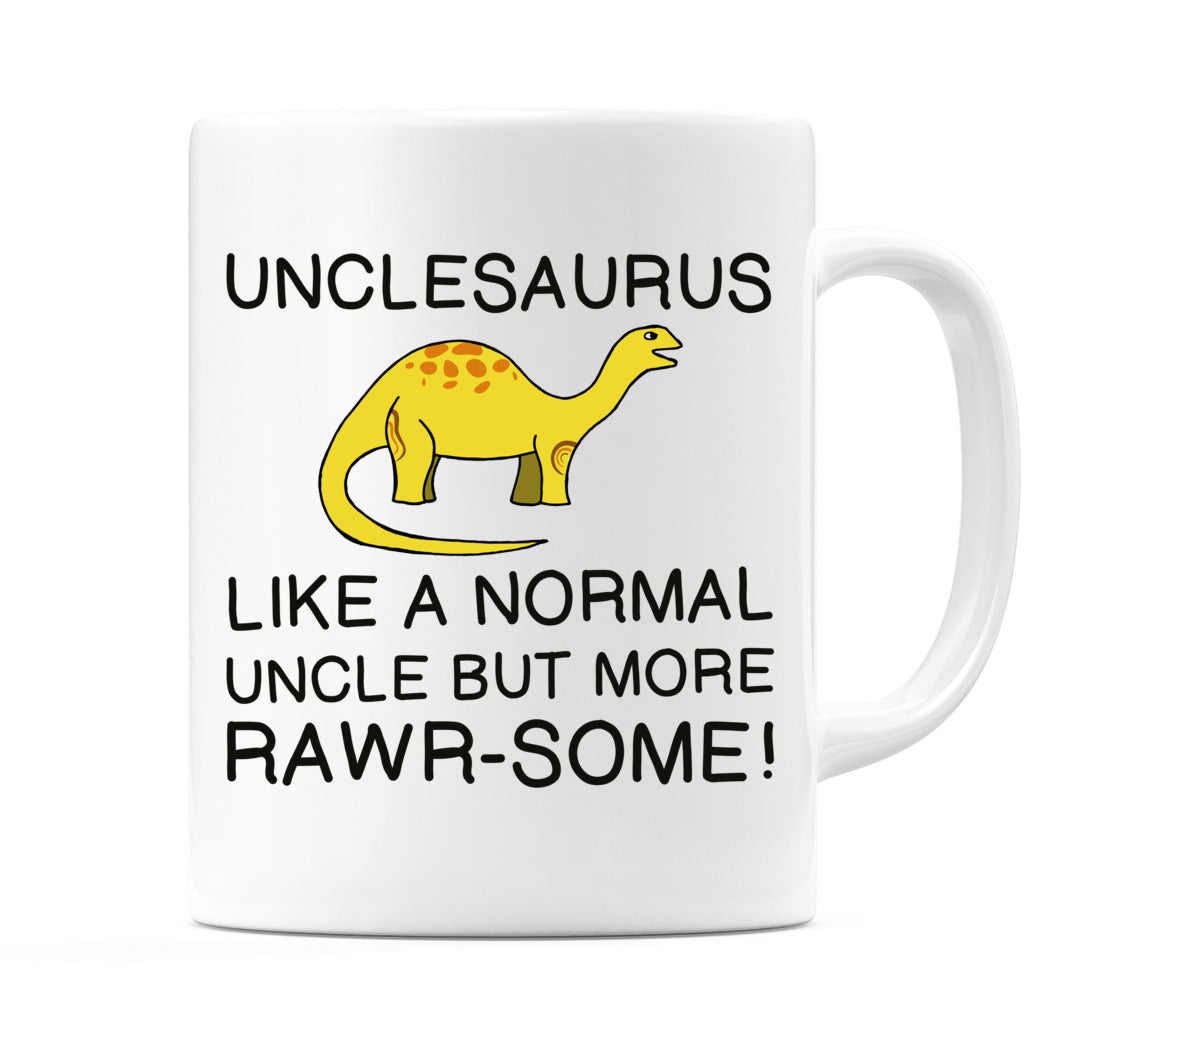 Unclesaurus - Like a normal uncle but more RAWR-SOME! Mug